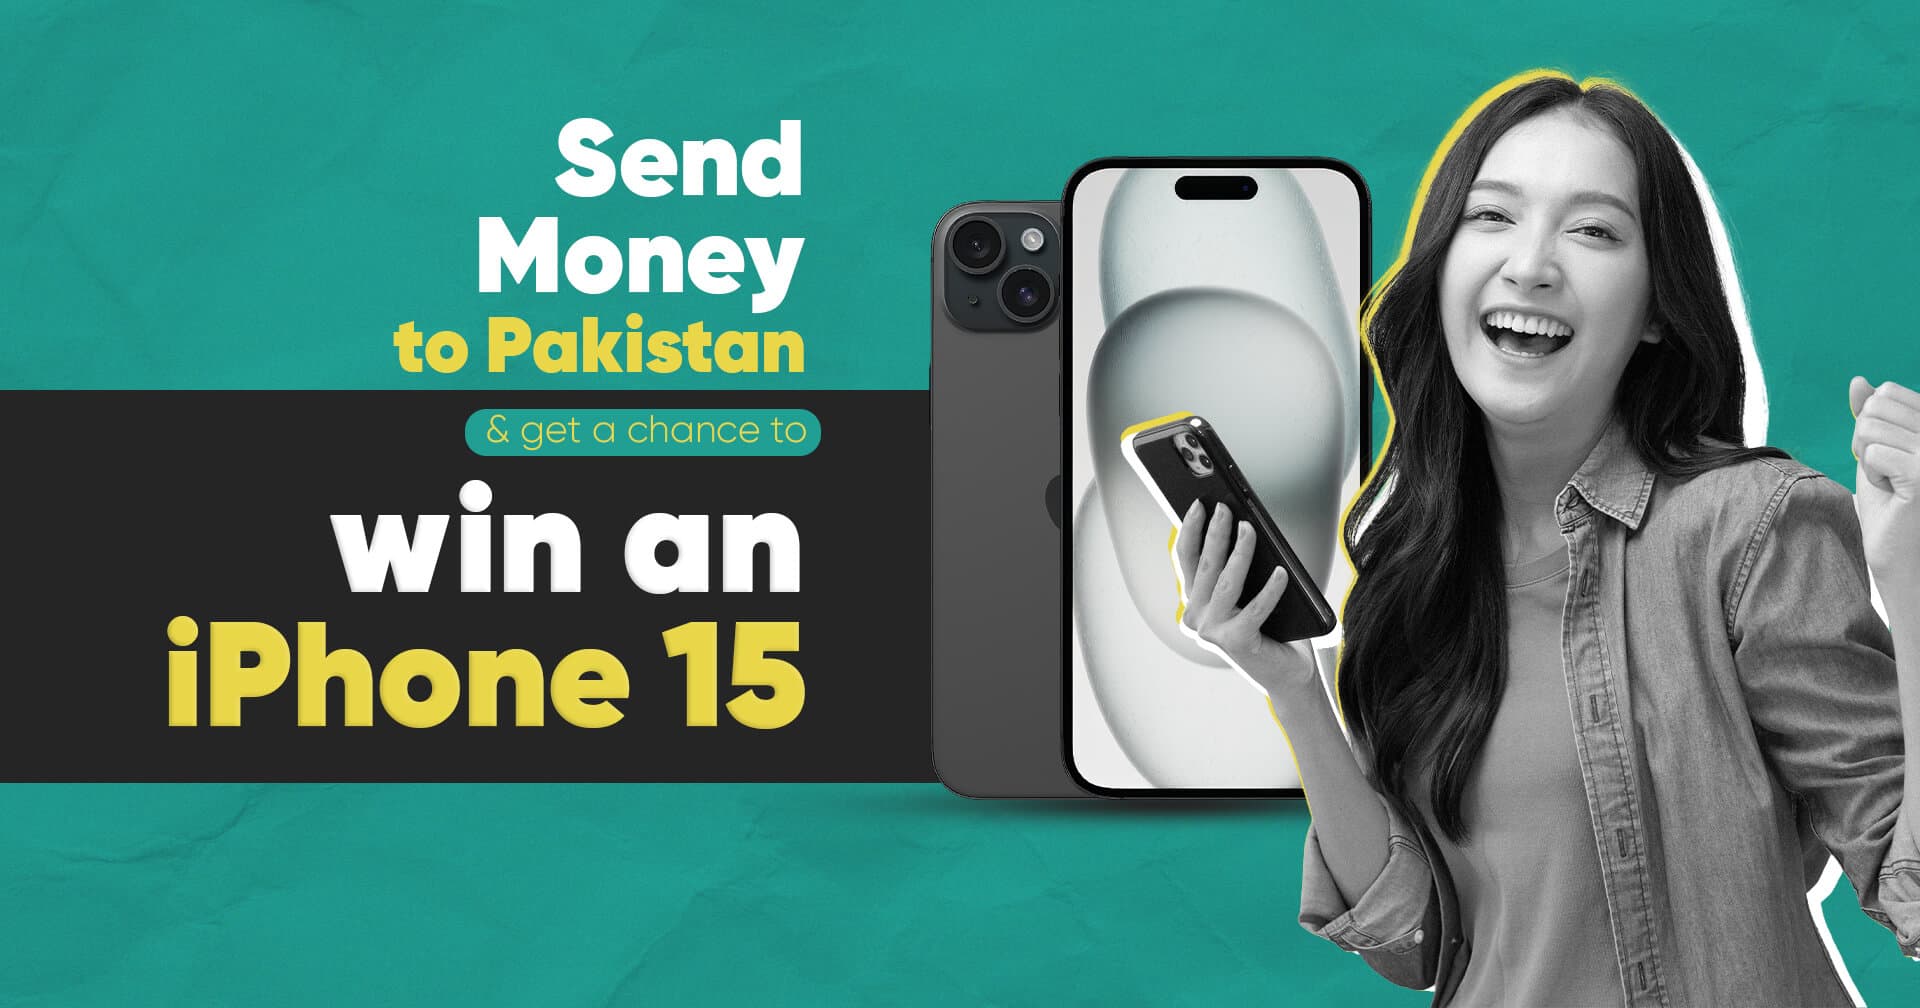 Win an iPhone 15 by Sending Money to Pakistan